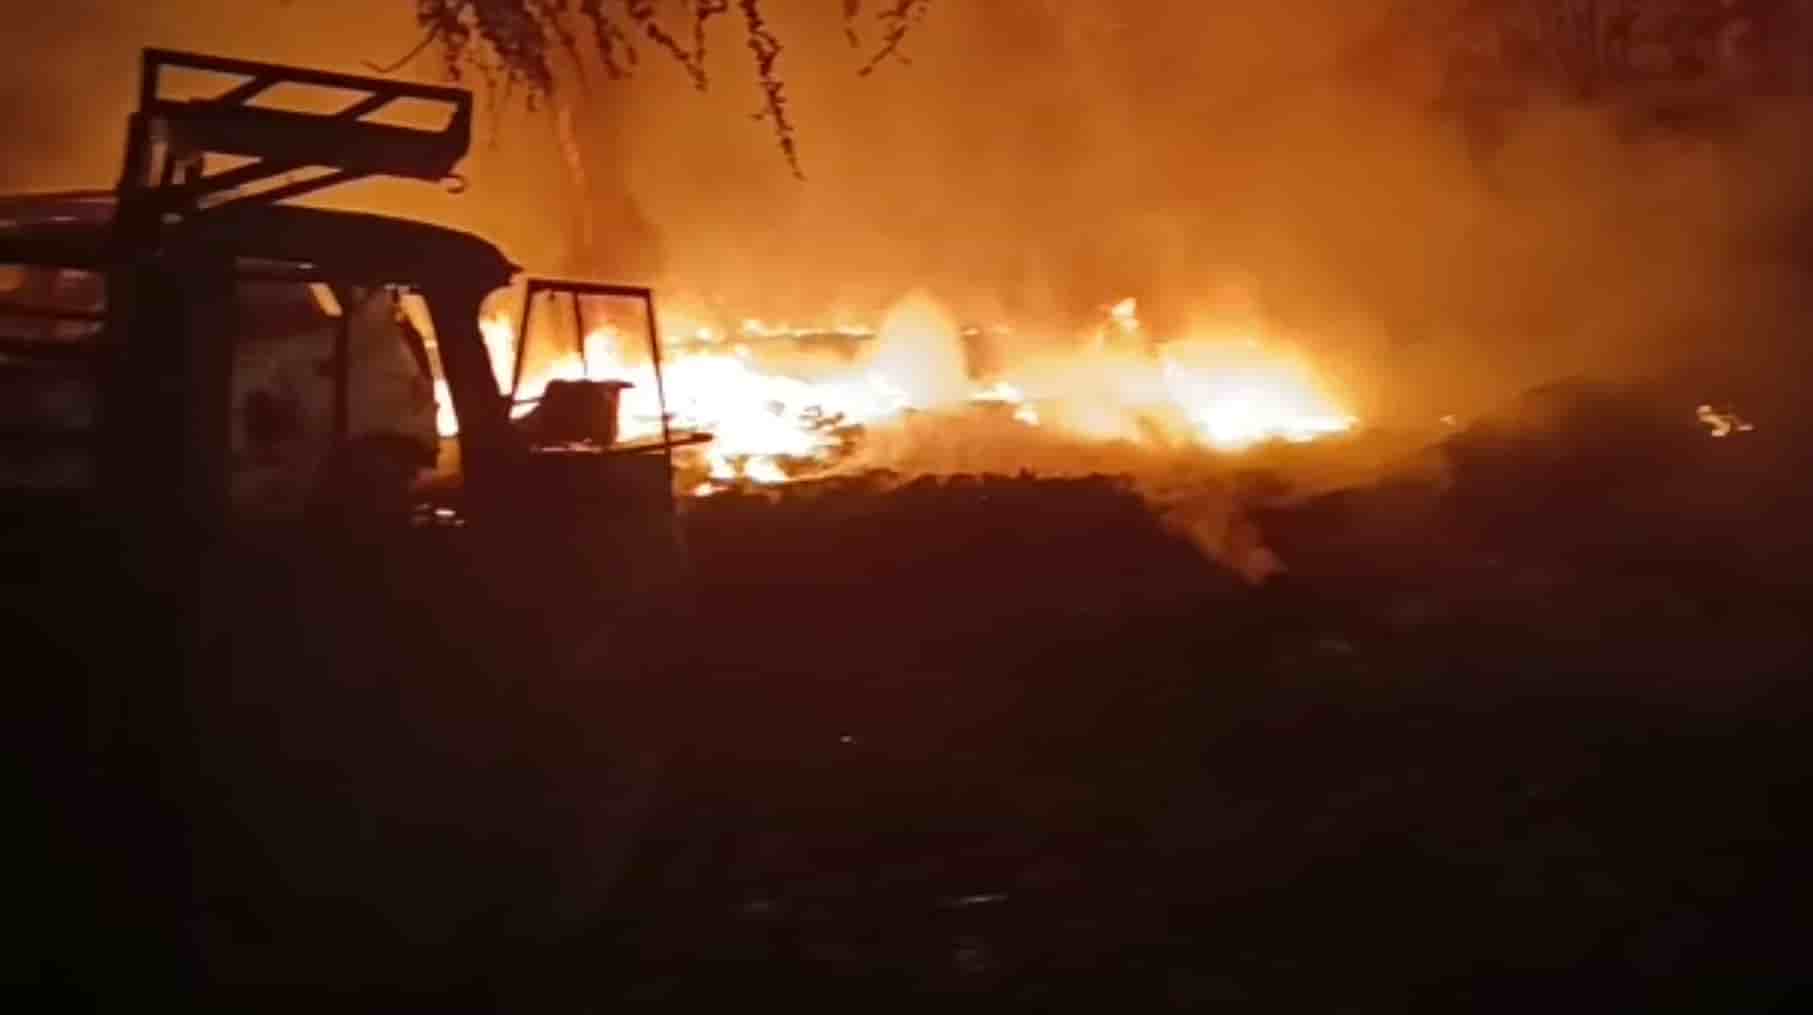 set to fire Unidentified miscreants set fire to seven vehicles in Jamshedpur leading to major destruction Authorities are investigating Town Post